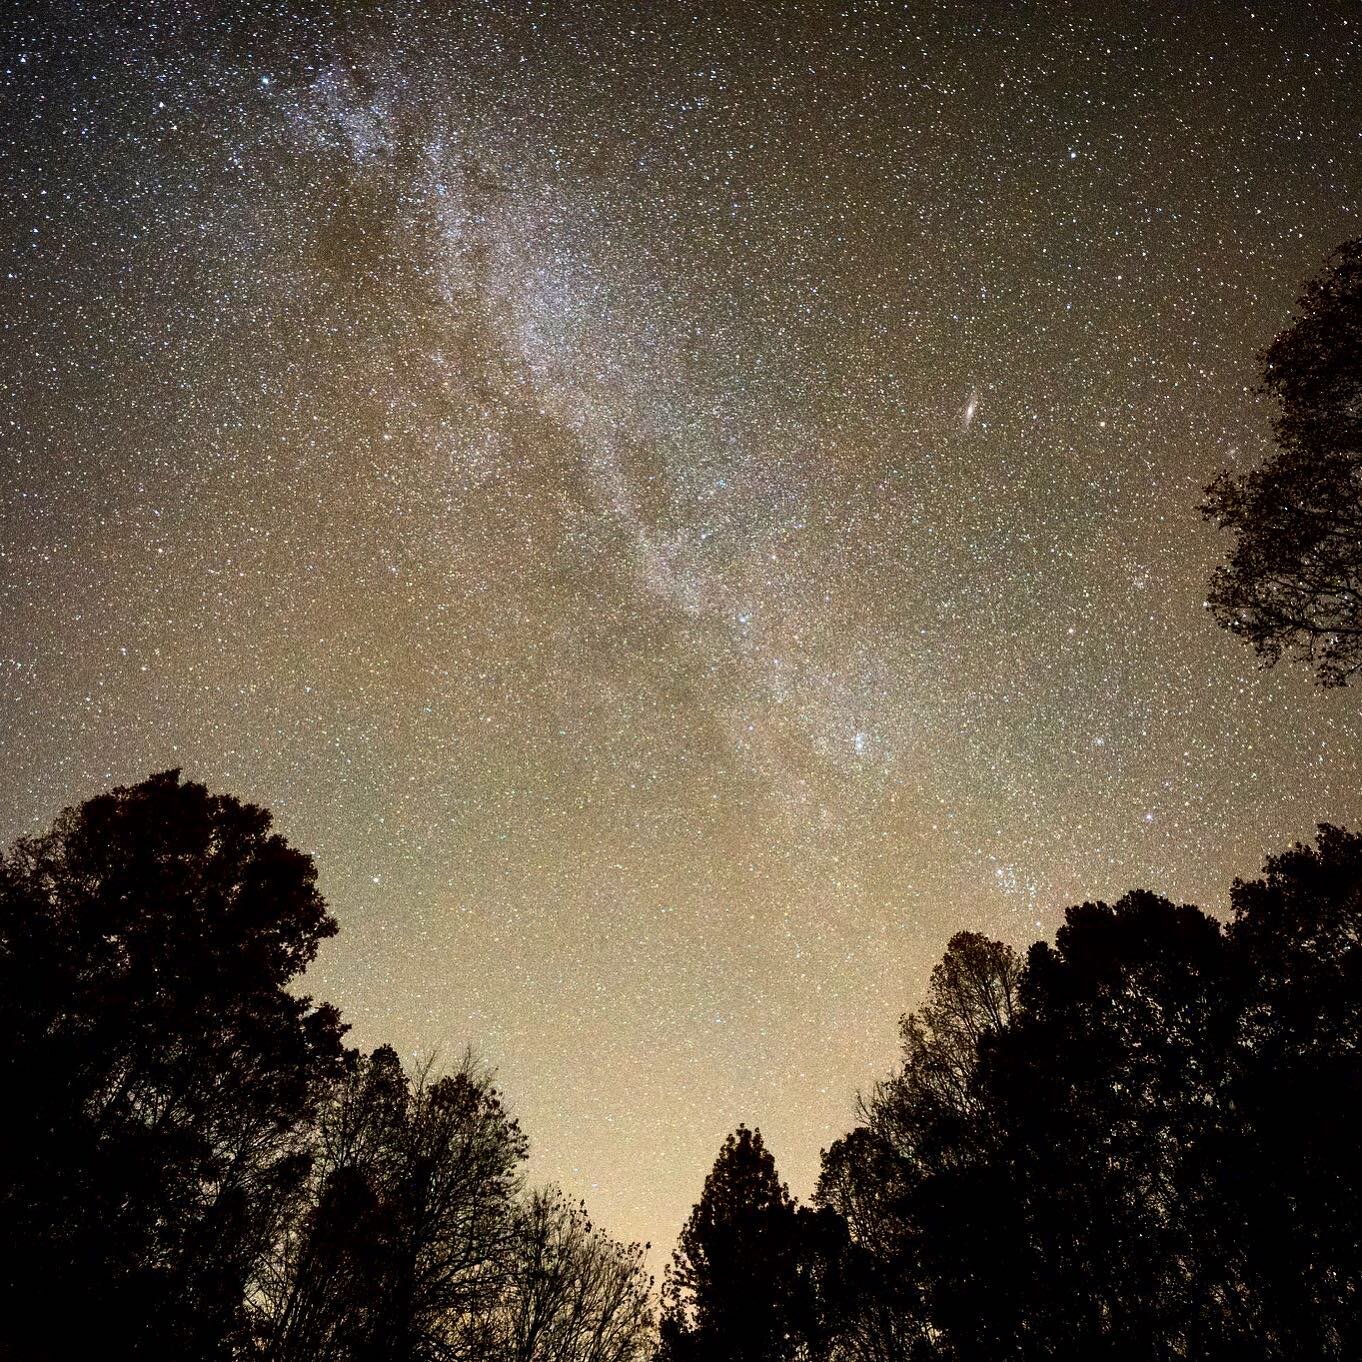 The stars as seen from Hocking Hills #hockinghills #ohio #astrophotography